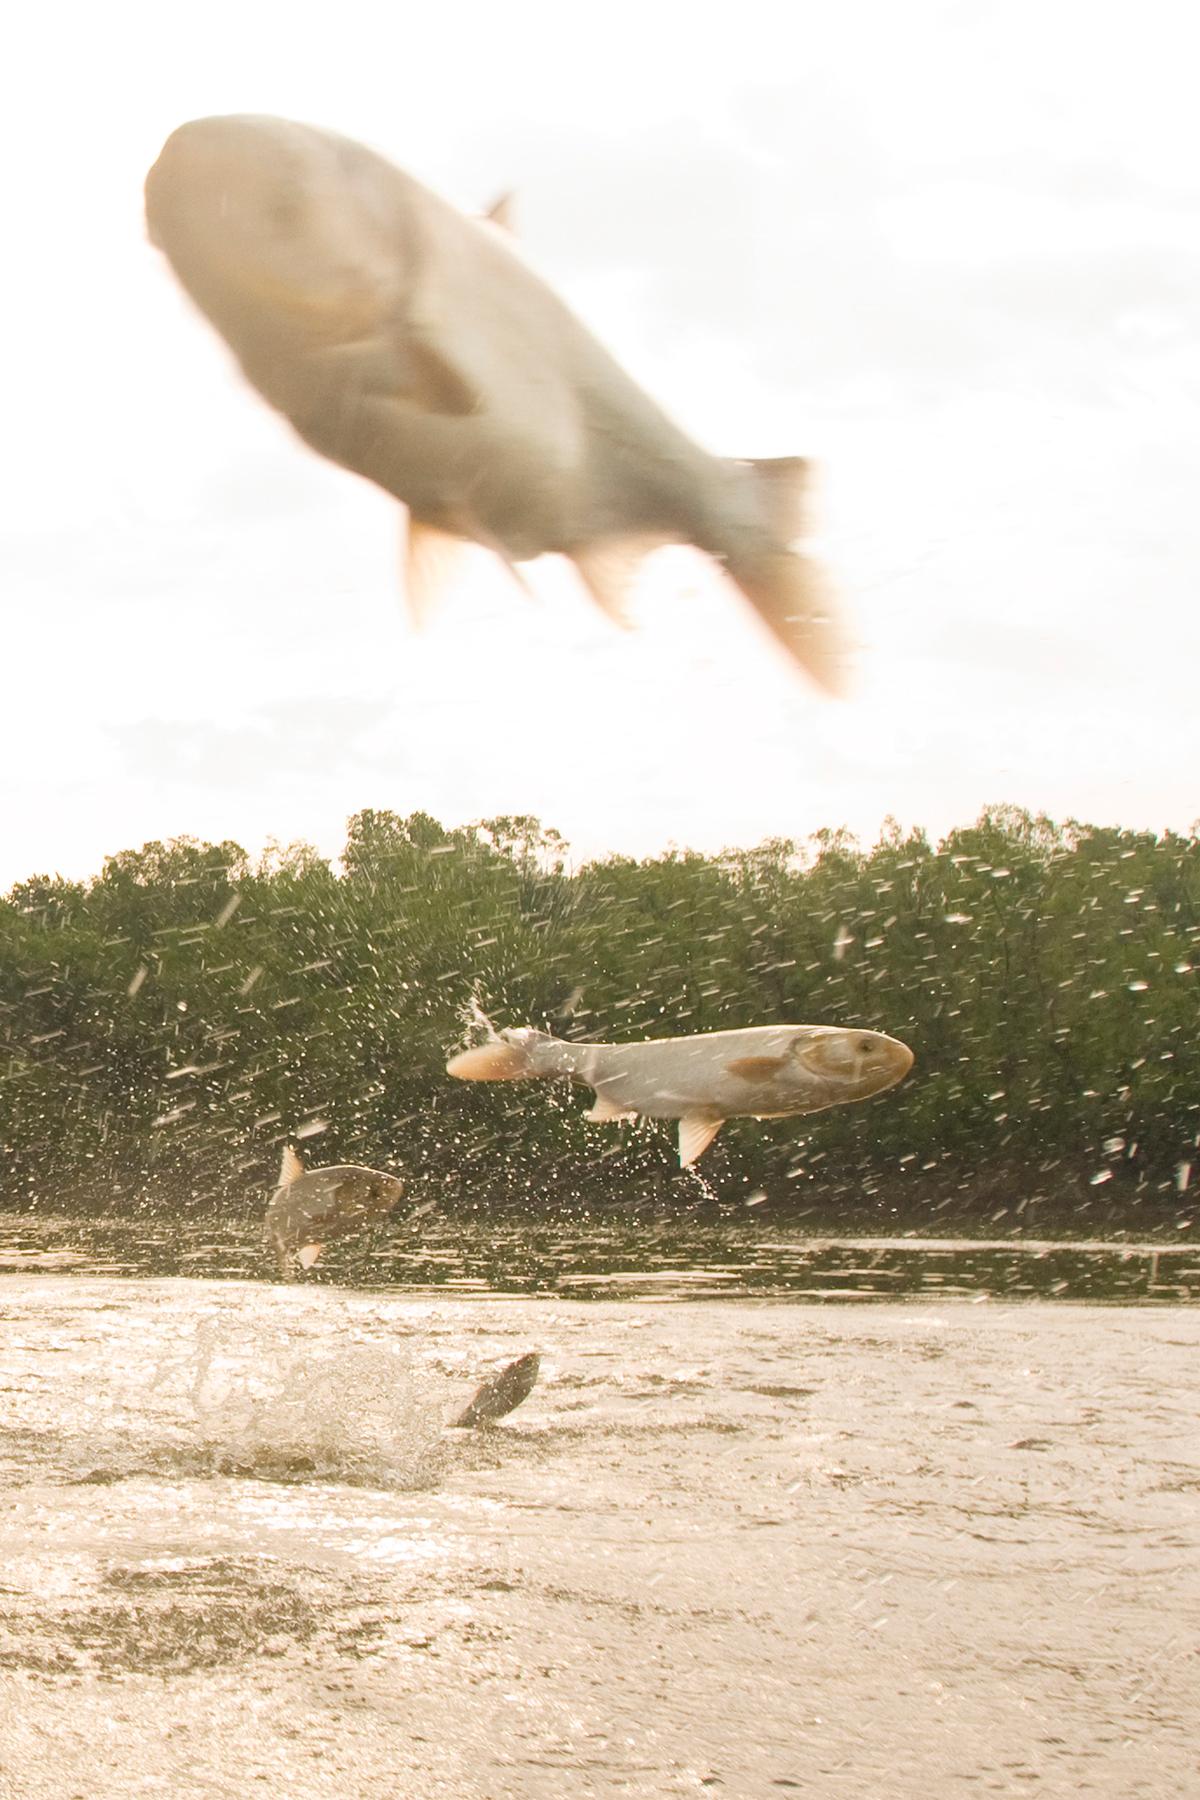 Two species of invasive carp, the bighead and silver, jumping out of the Illinois River near Havana, Illinois